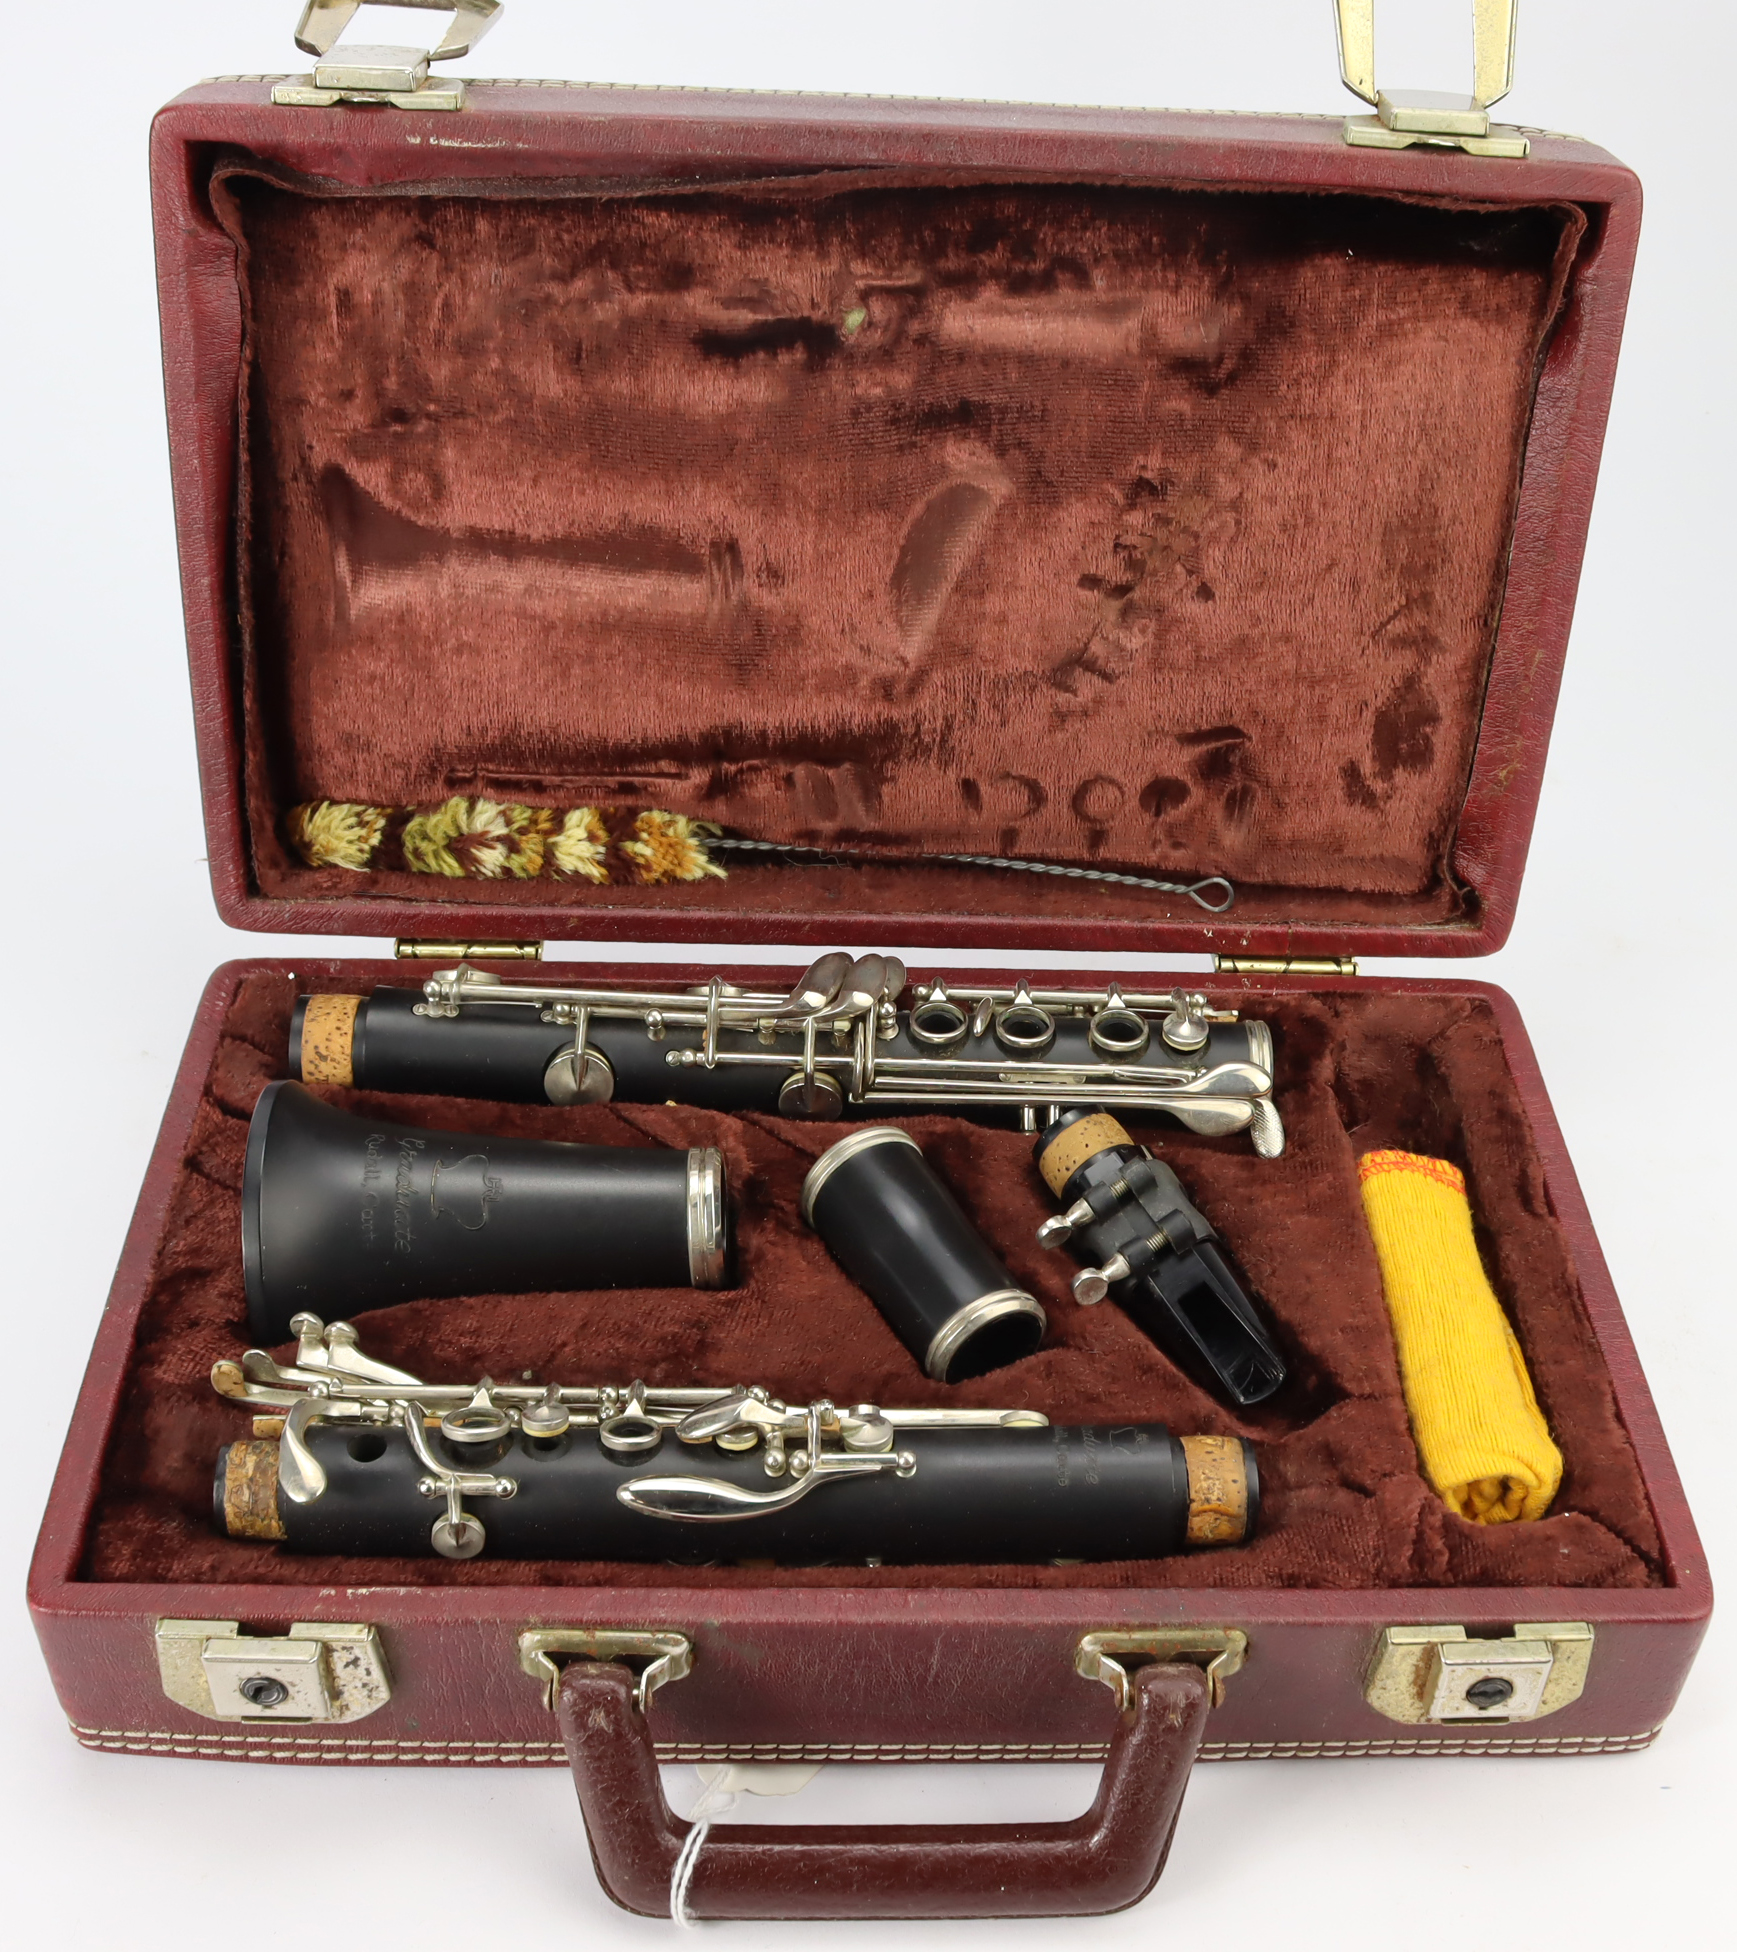 Graduate Clarinet by Rudall, Carte, contained in fitted case